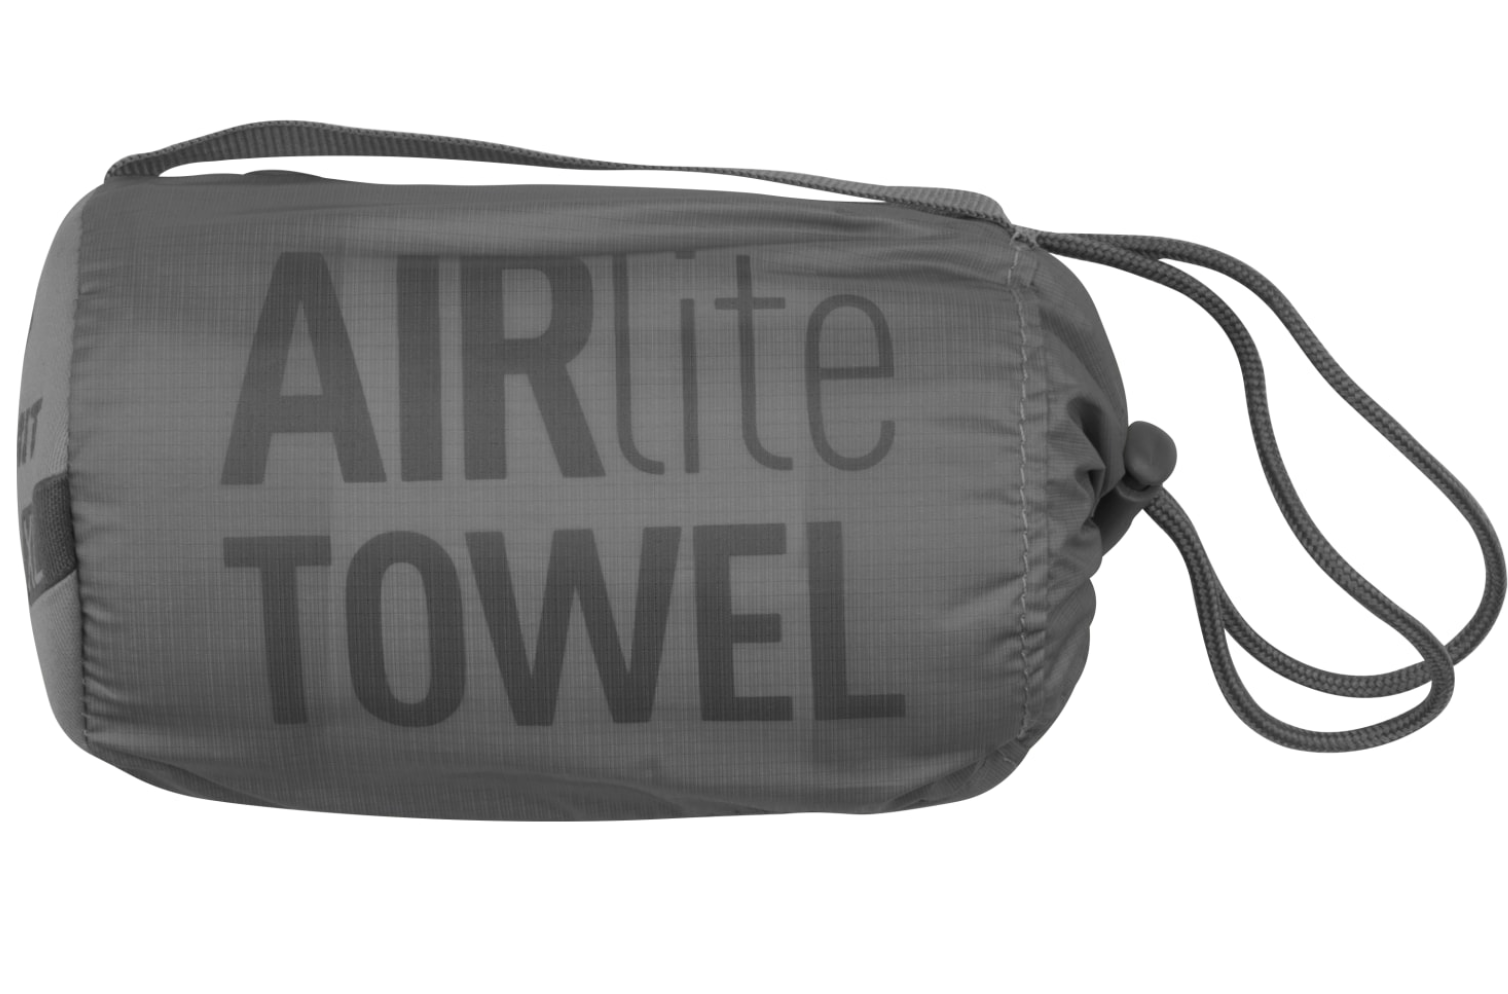 Sea to Summit Airlite Towel - Extra Large